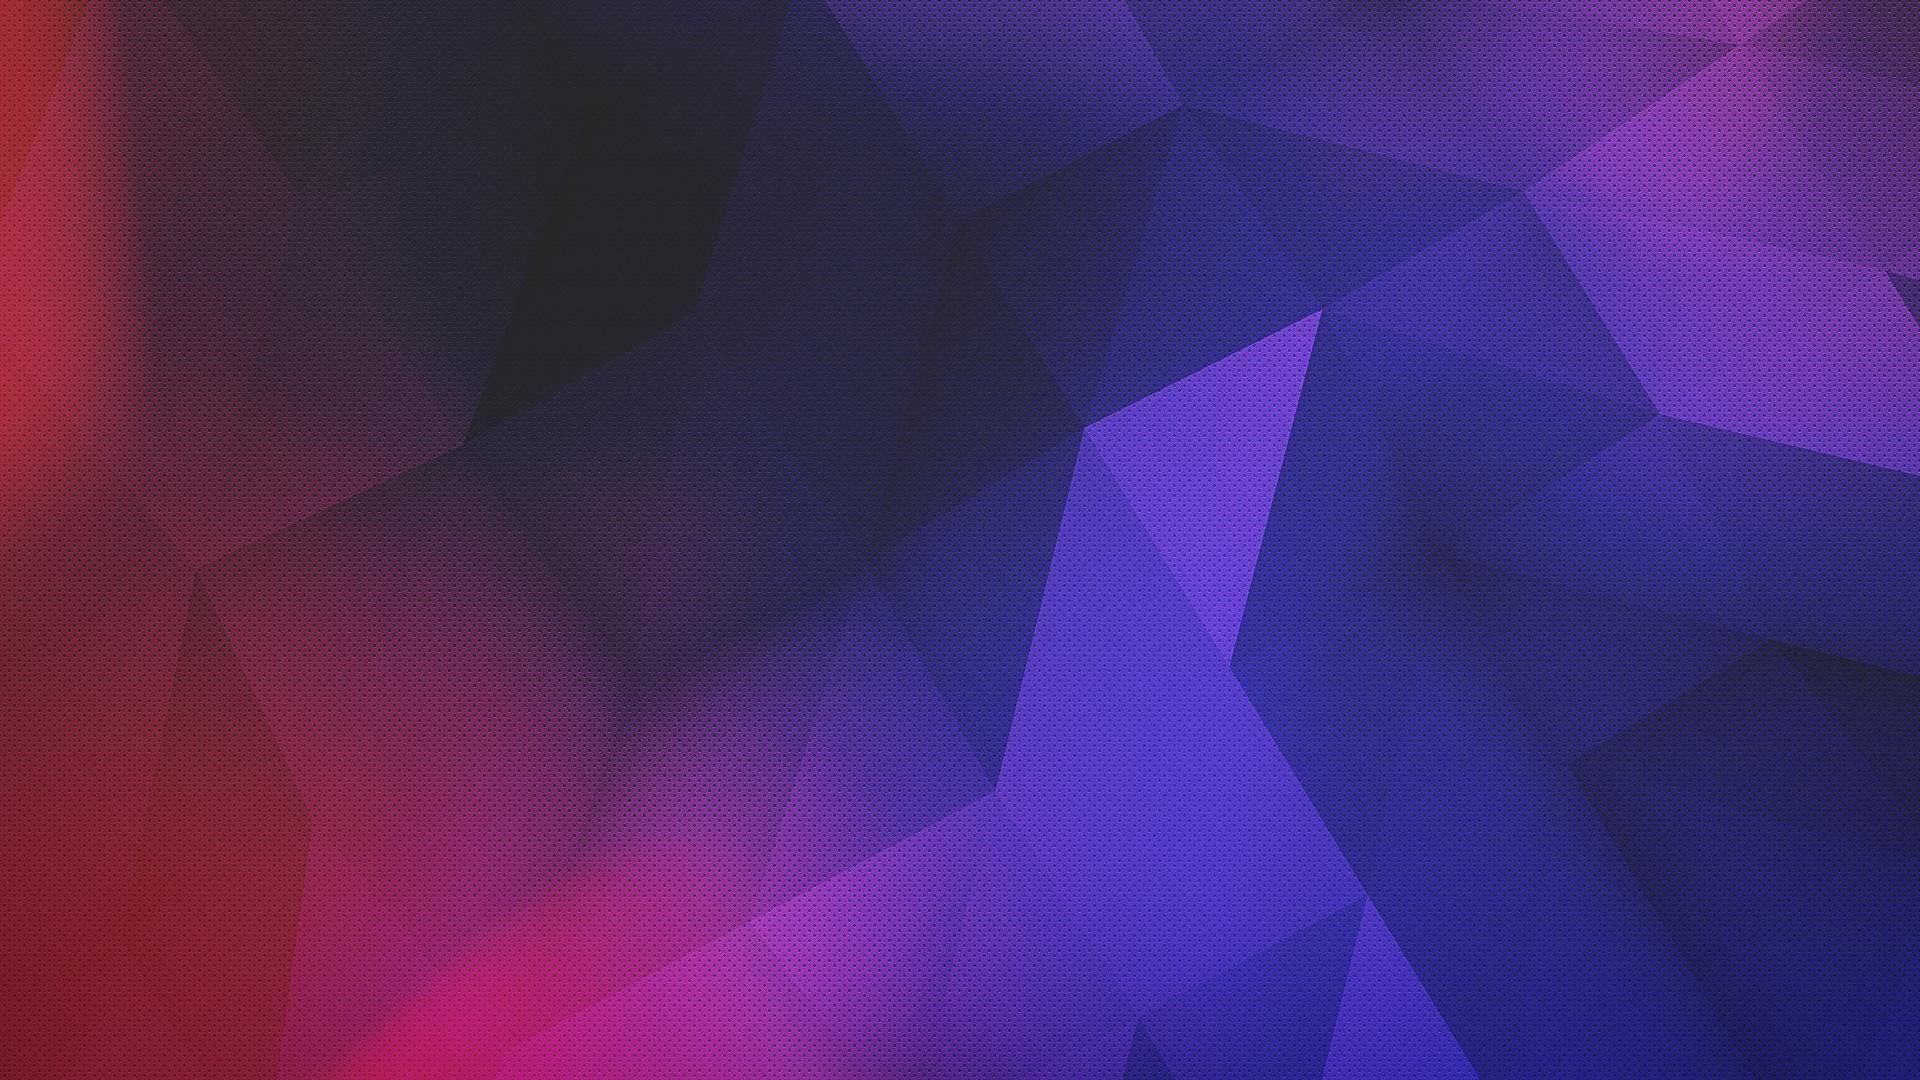 Wallpaper.wiki Blue And Purple Background Free Download PIC